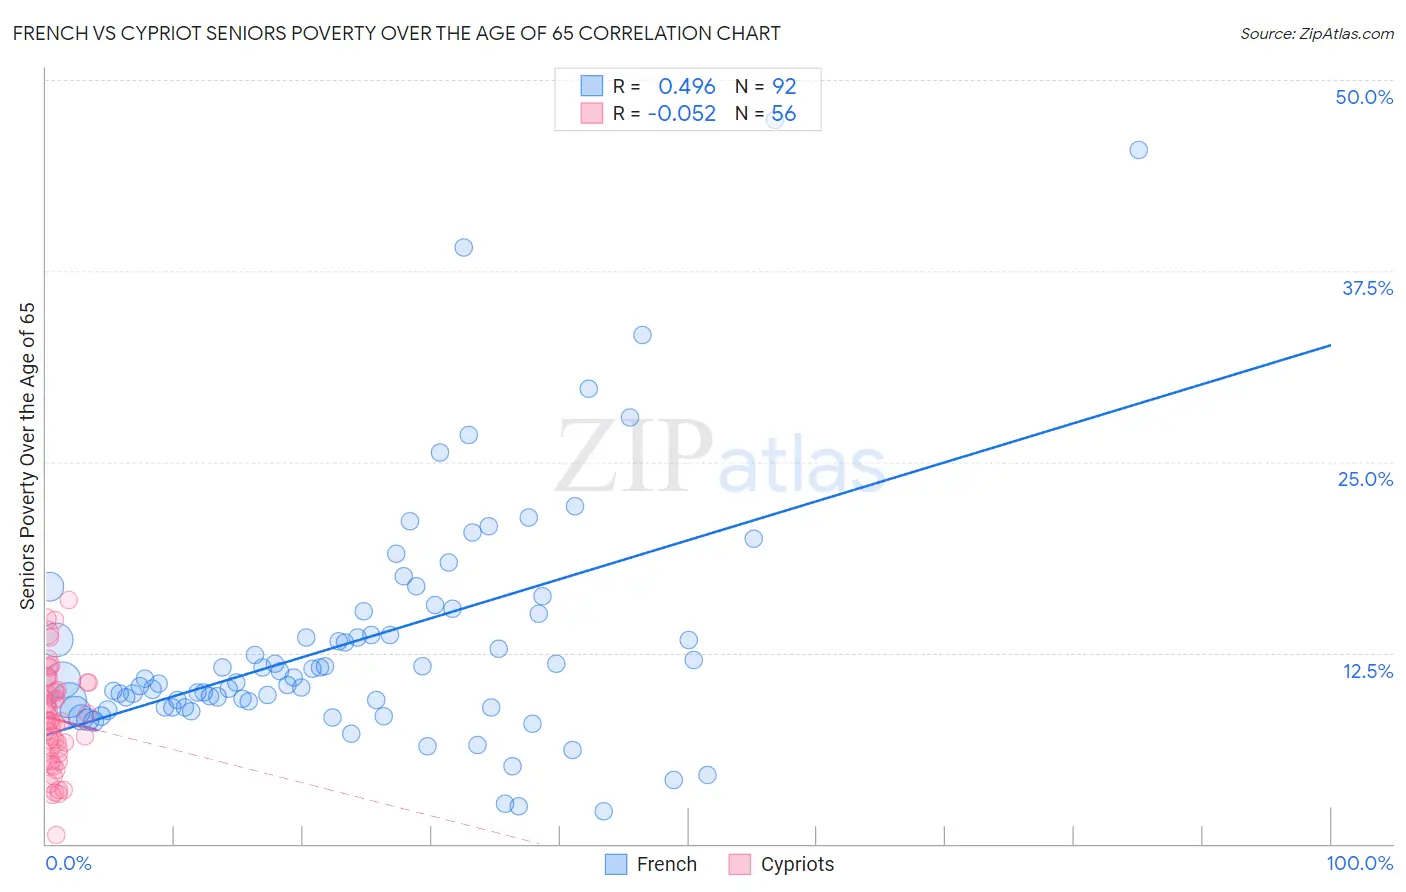 French vs Cypriot Seniors Poverty Over the Age of 65